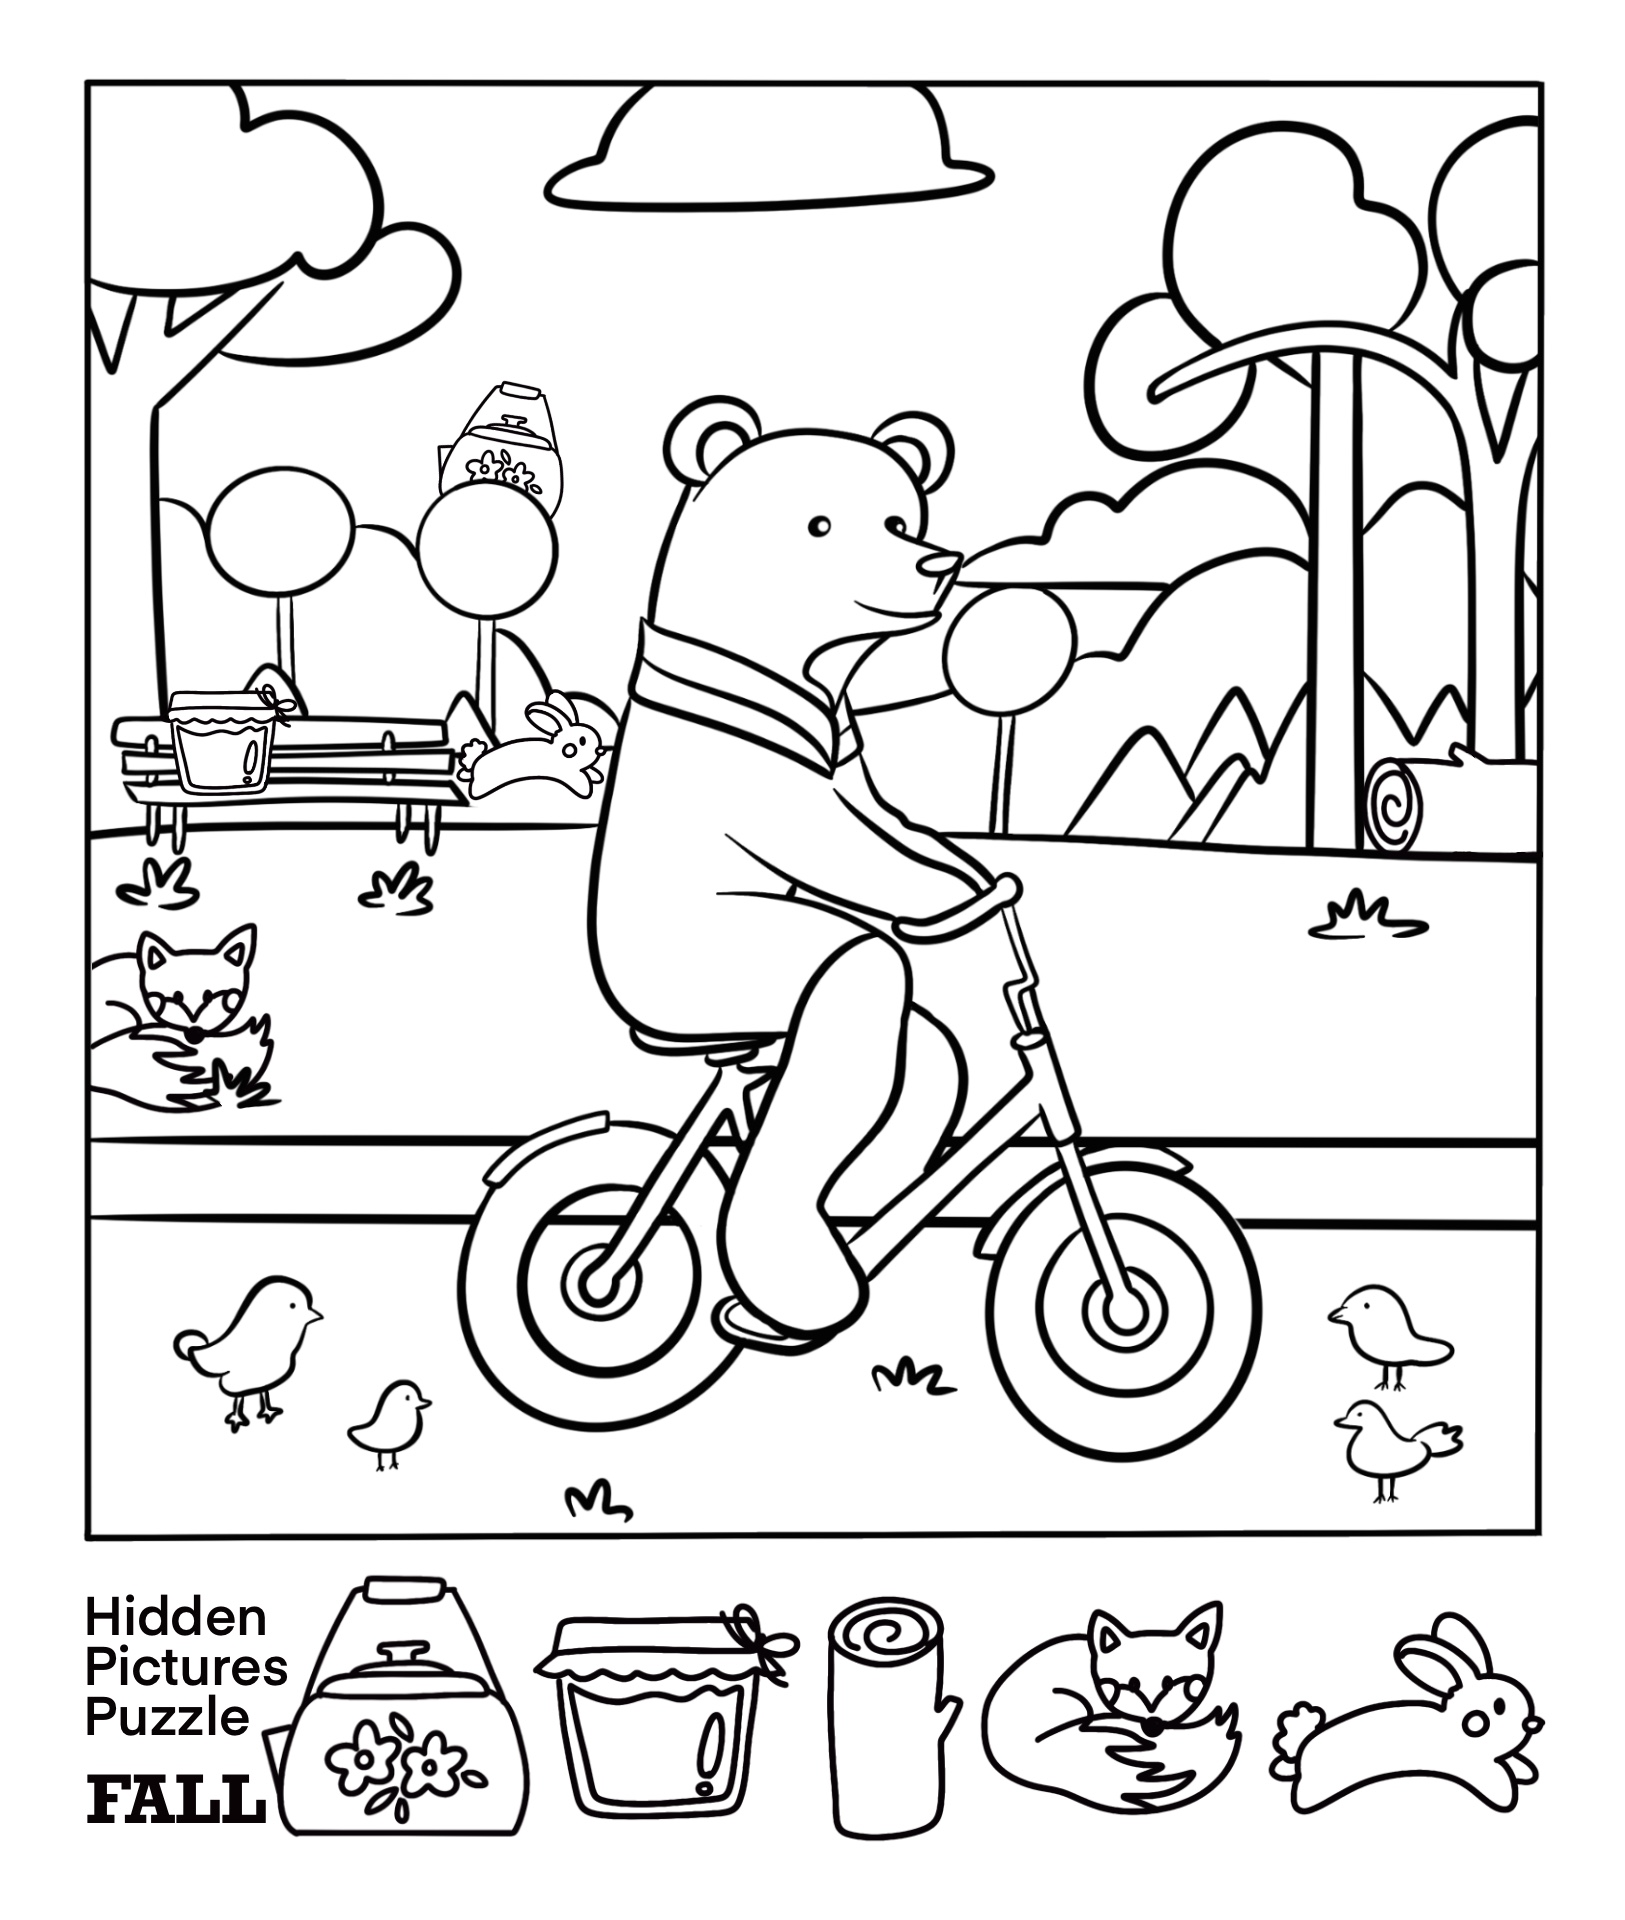 Printable Hidden Pictures for Kids